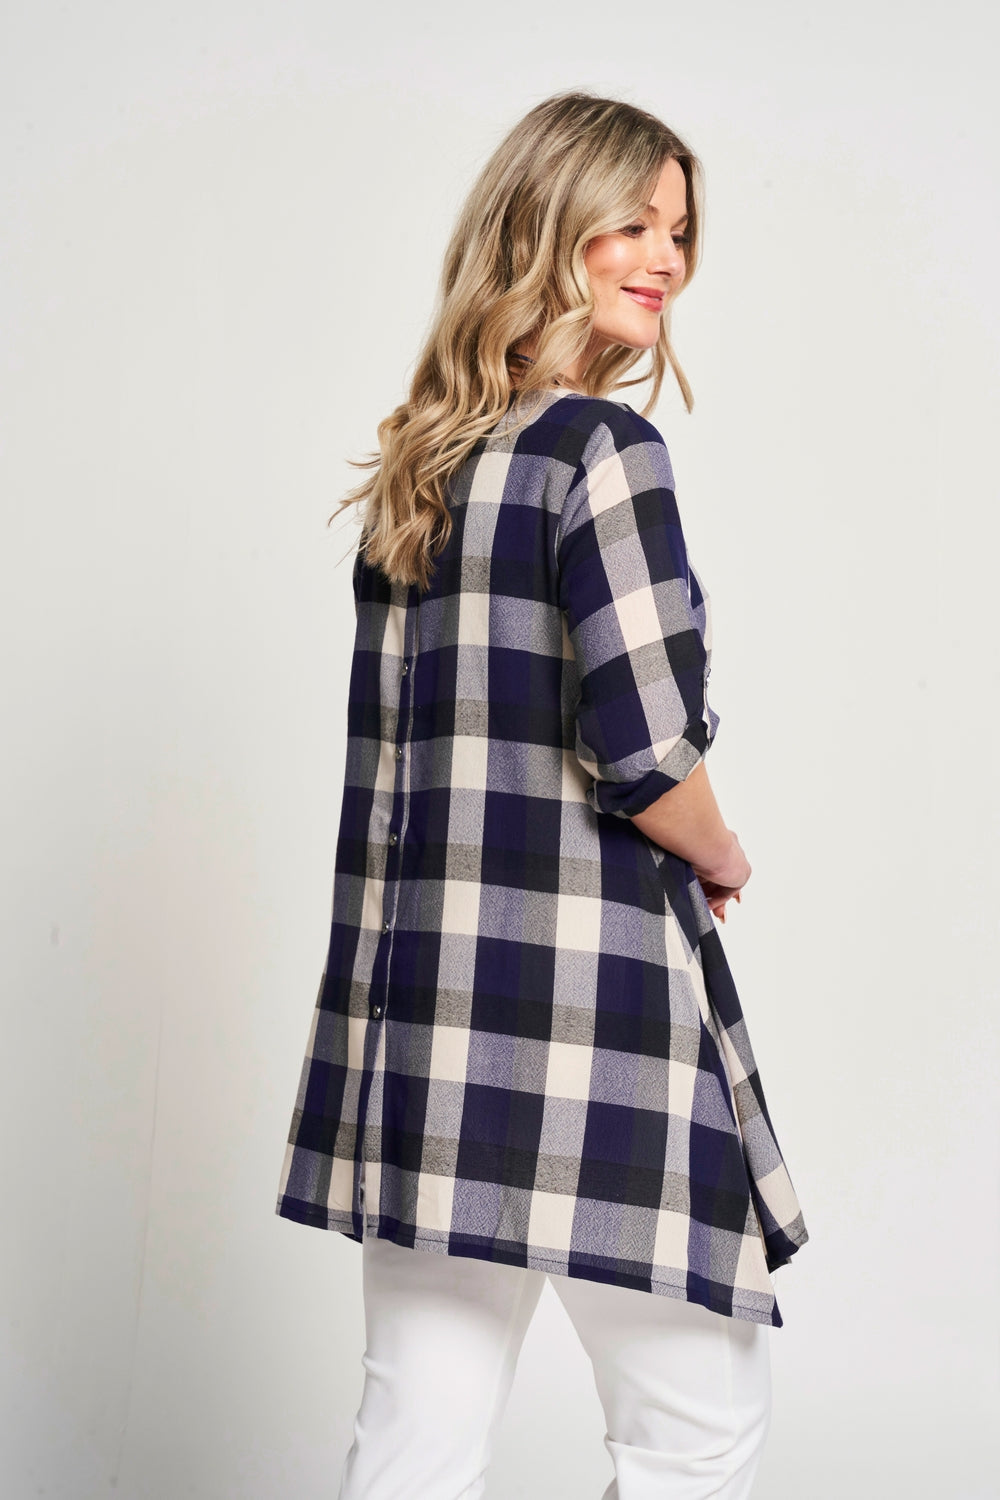 Saloos Check Tunic with Necklace